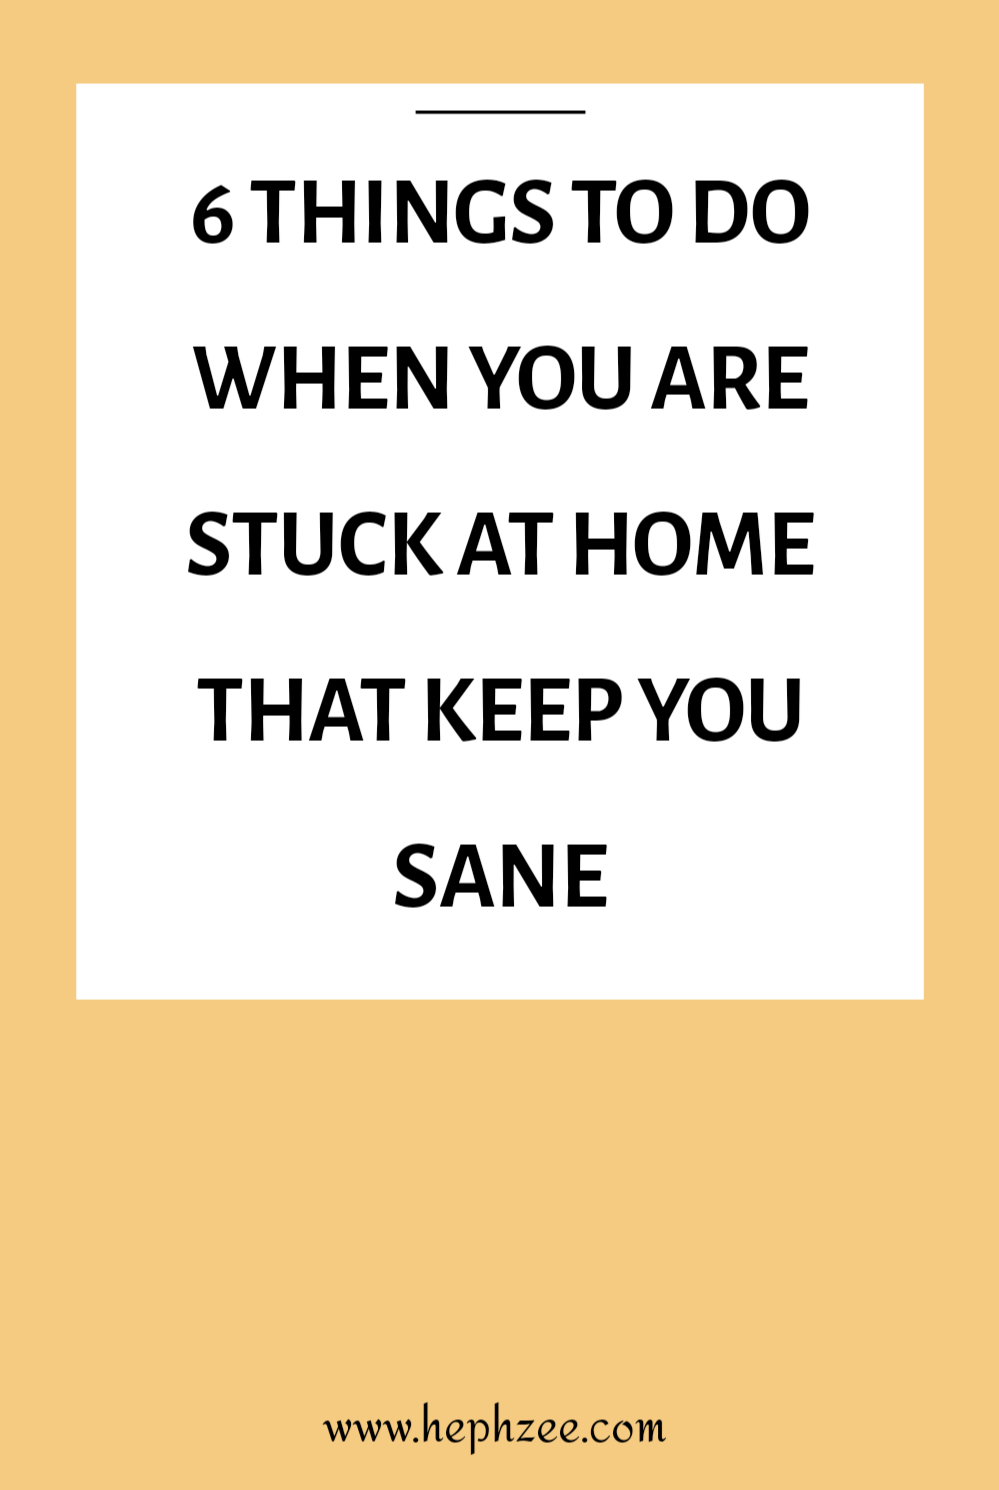 Tips for staying sane while staying home